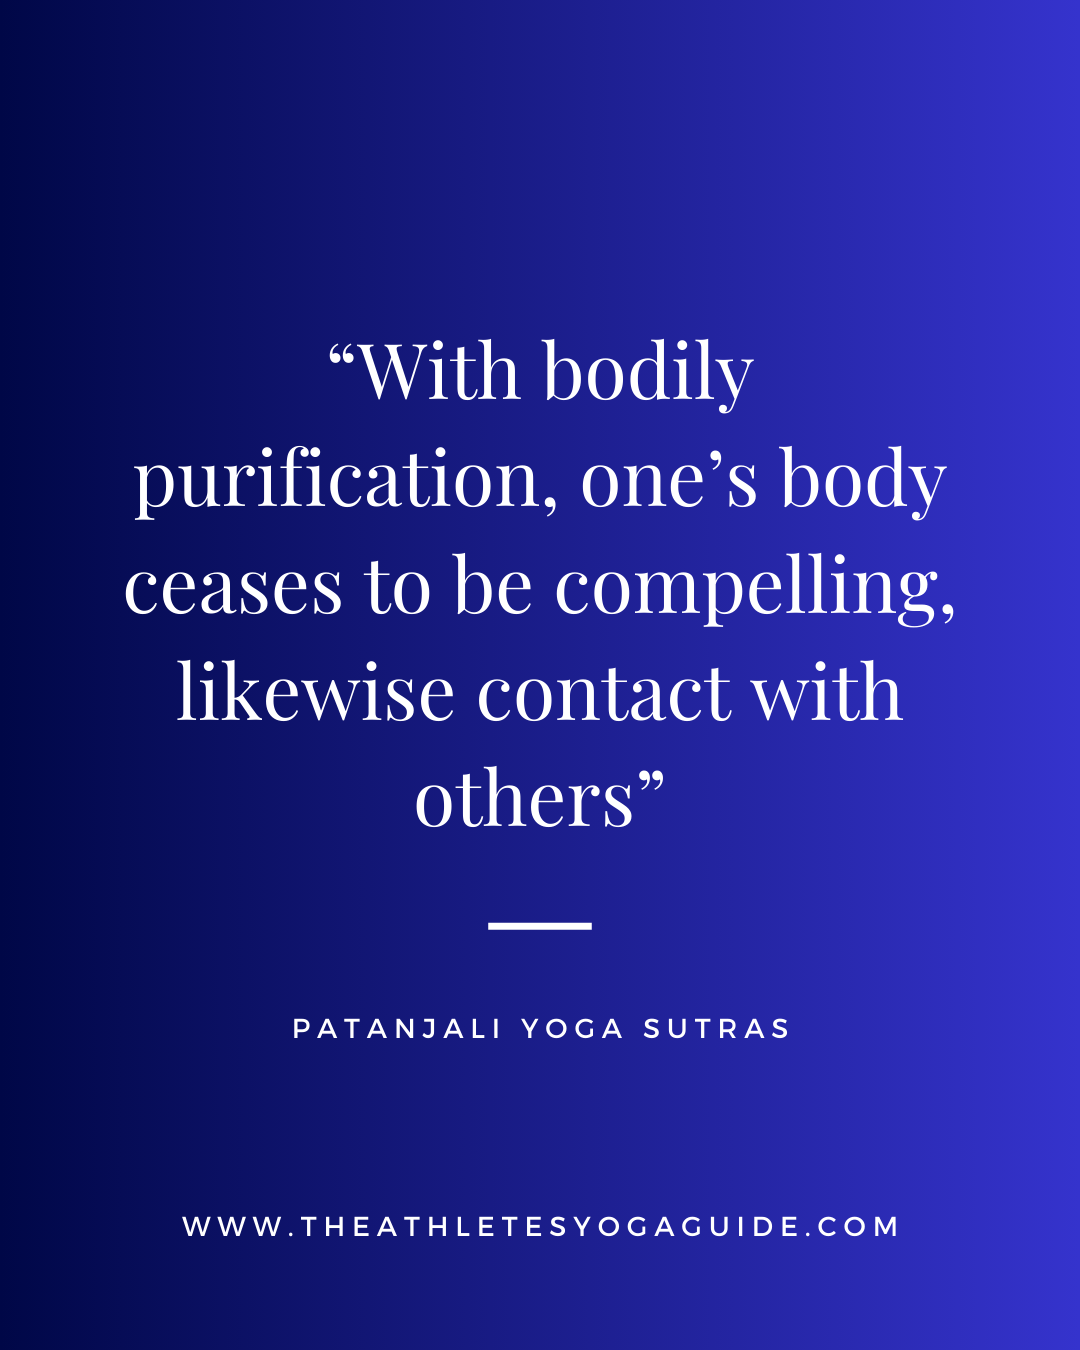 Bodily Purification in the Patanjali Yoga Sutras